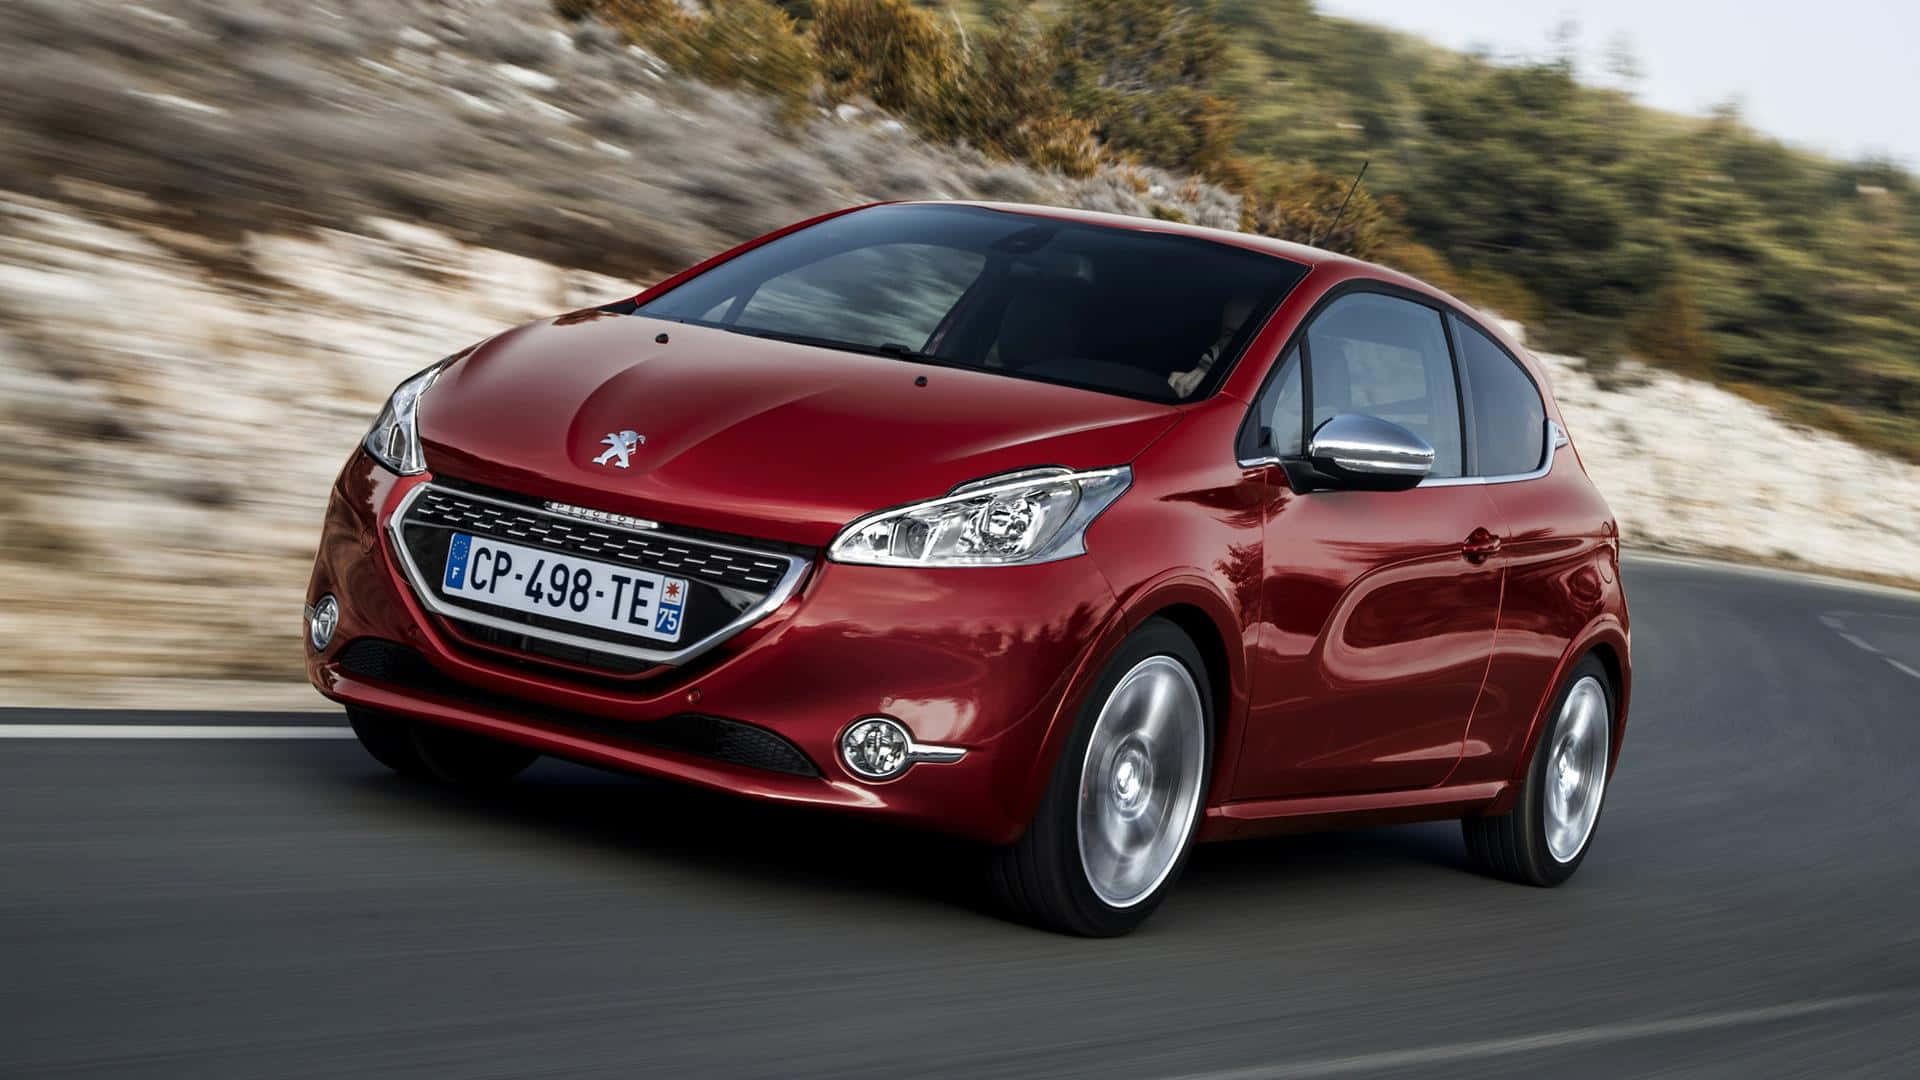 Sleek and Stylish Peugeot 208 in a Stunning Urban Environment Wallpaper